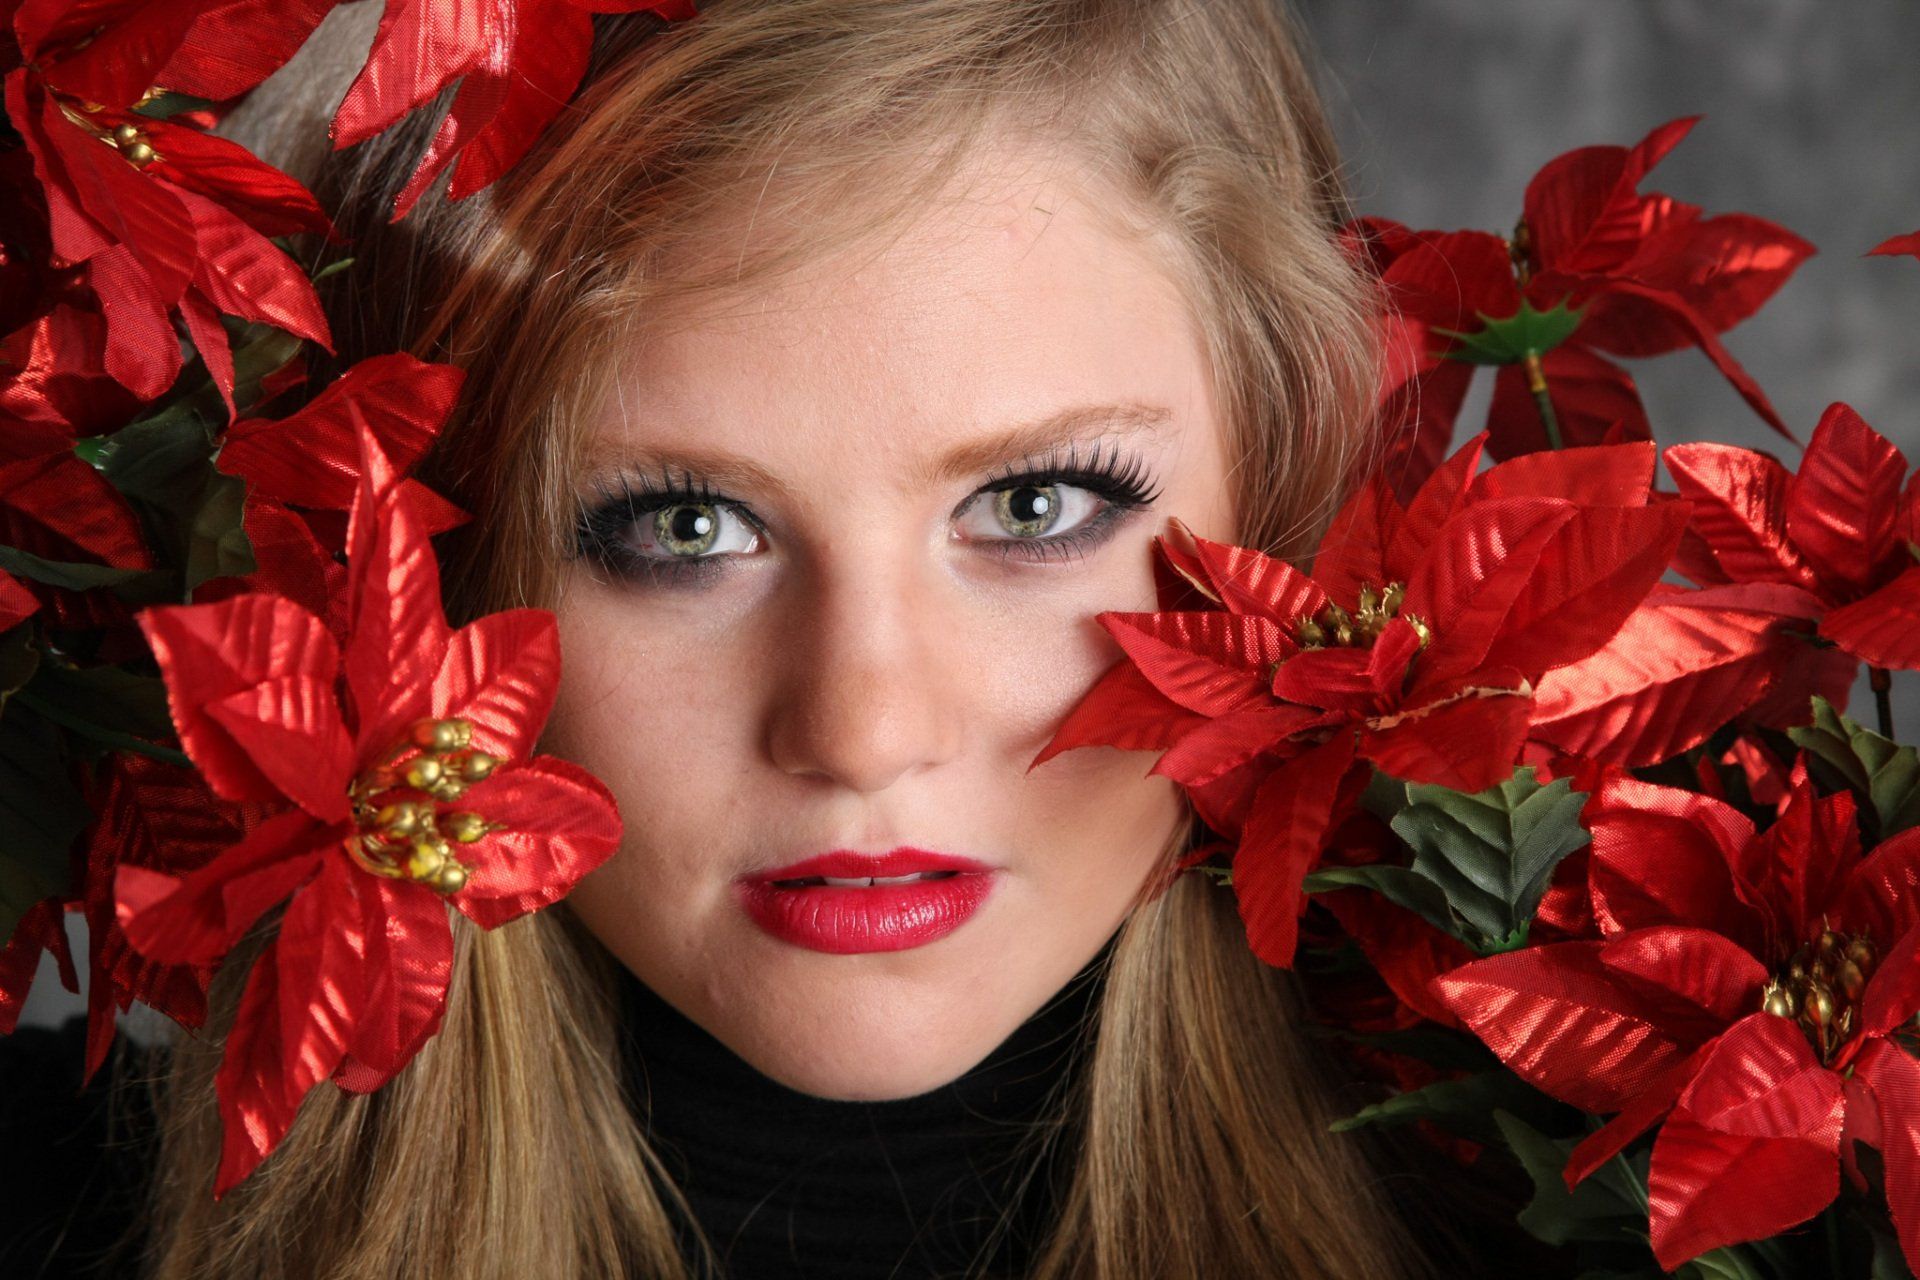 A woman with blond hair holding red flowers around her face for a creative studio portrait